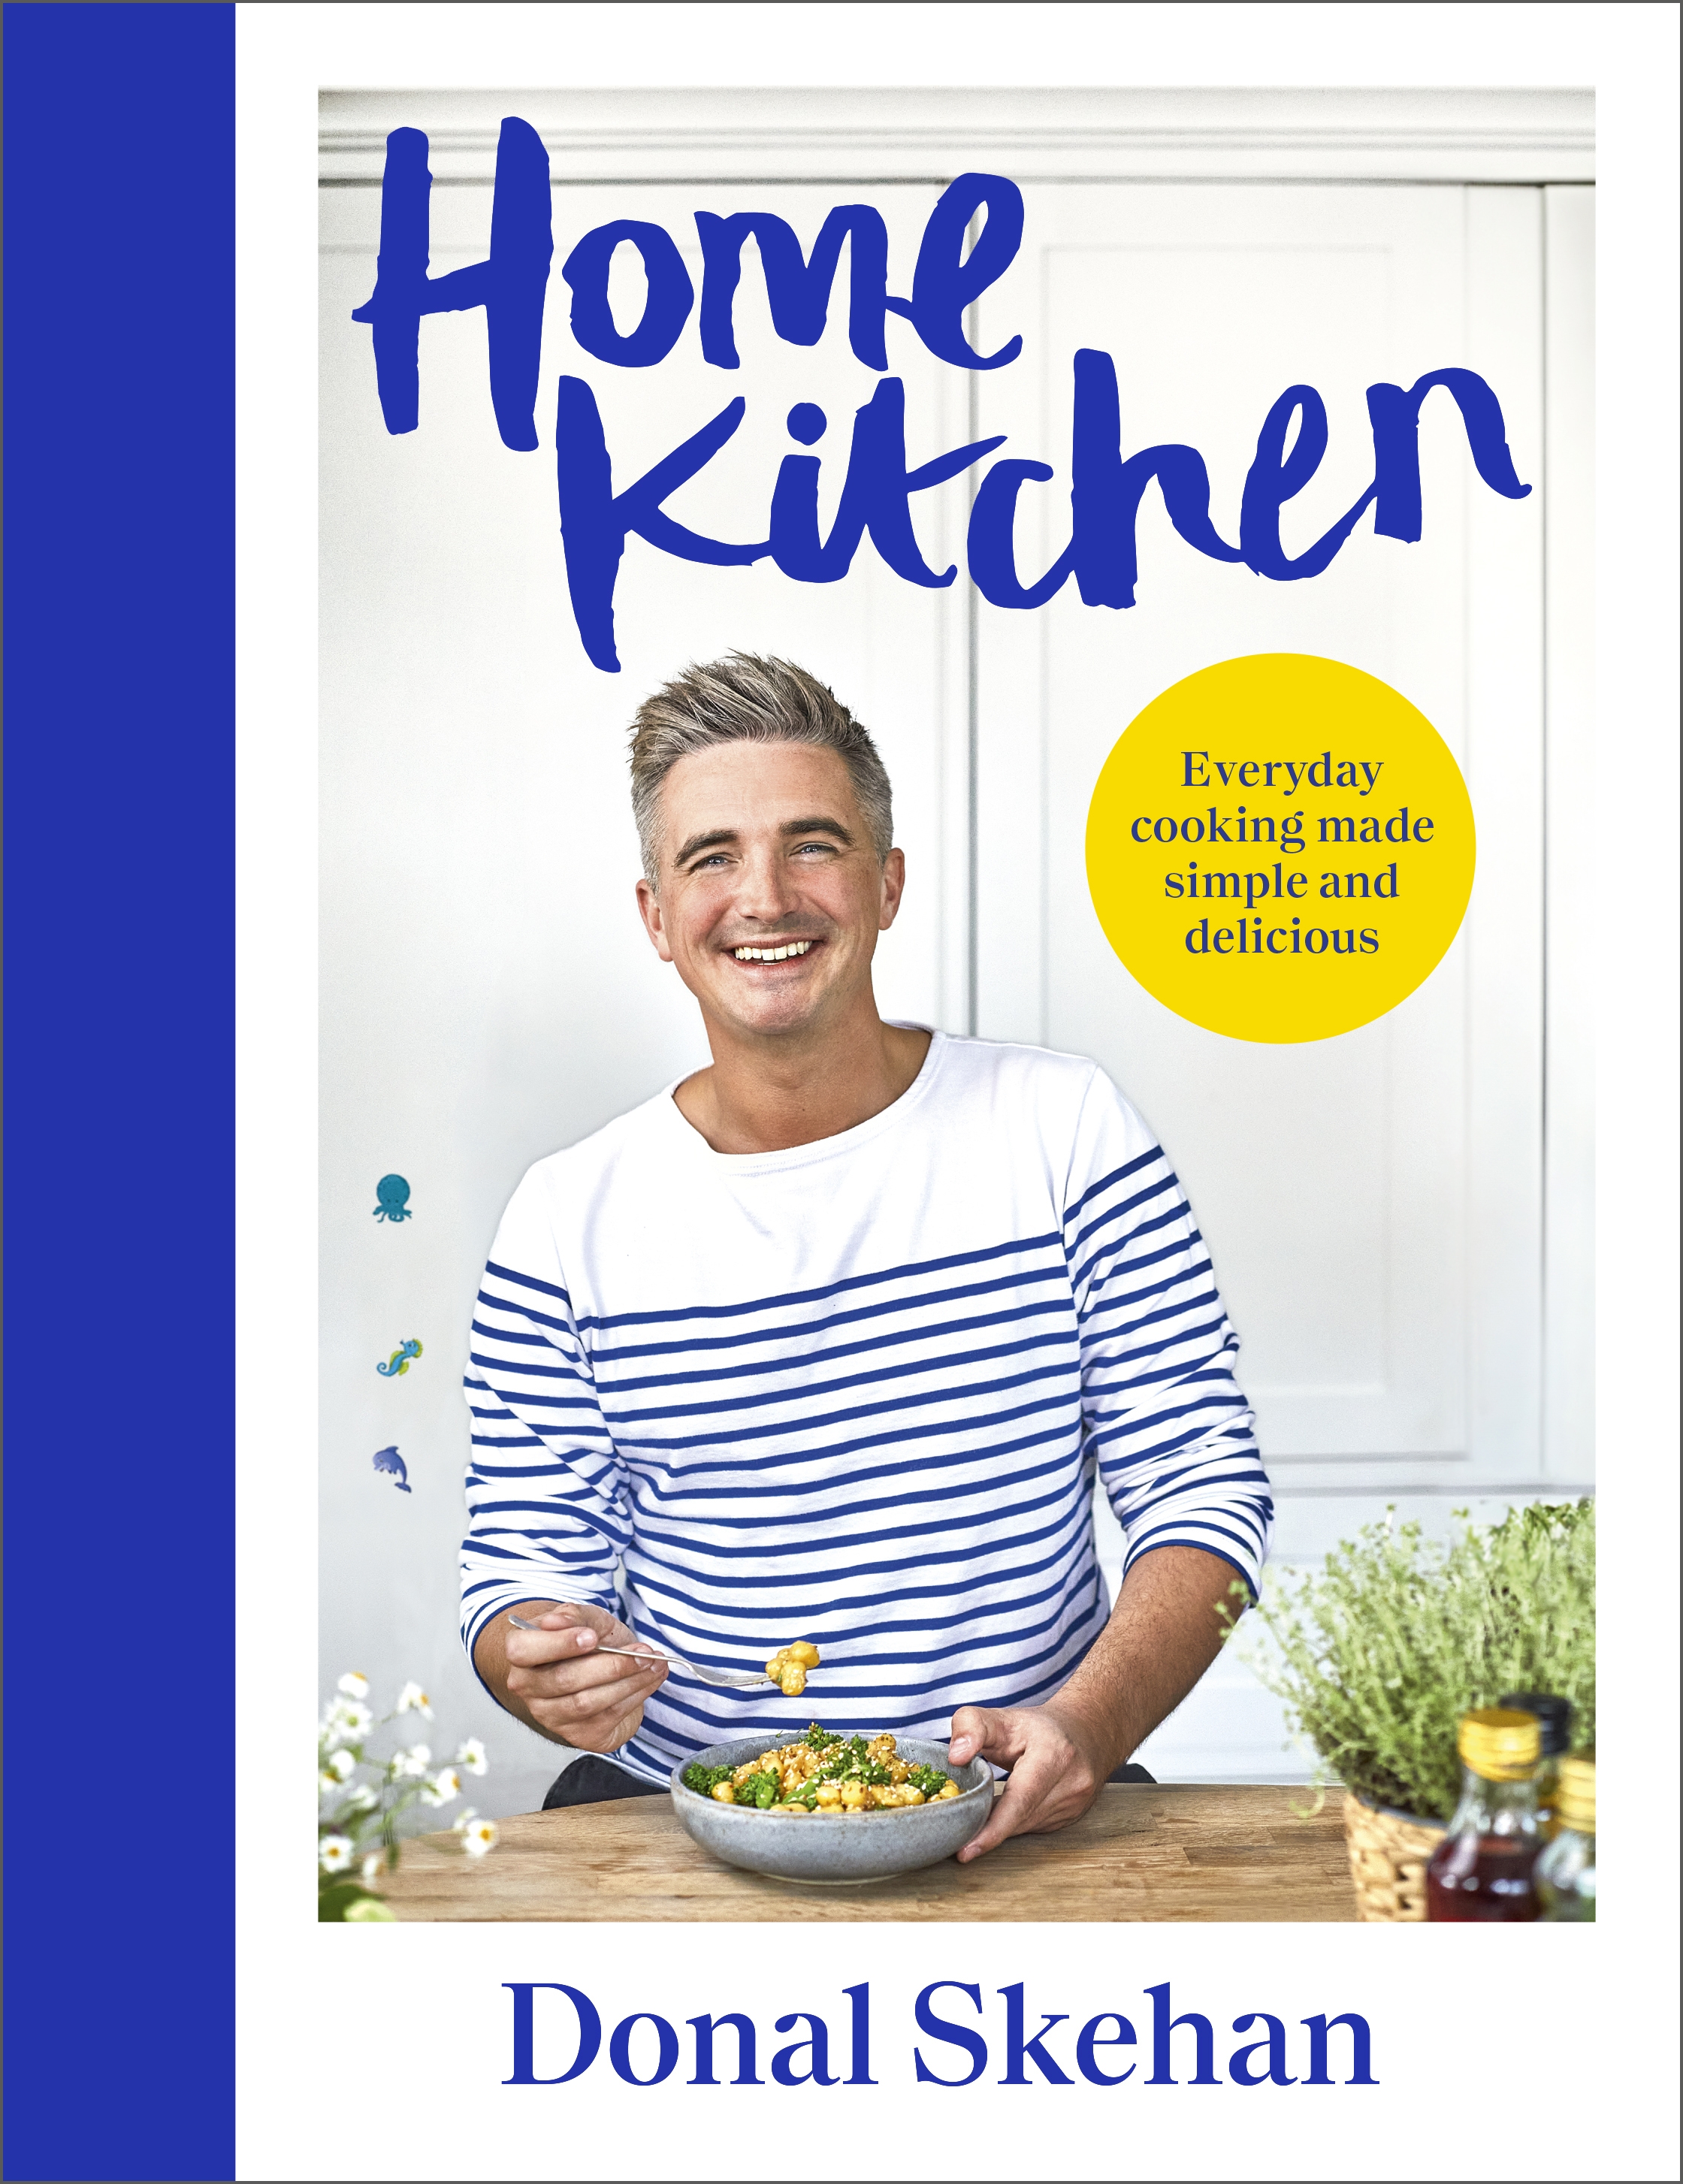 Home Kitchen by Donal Skehan